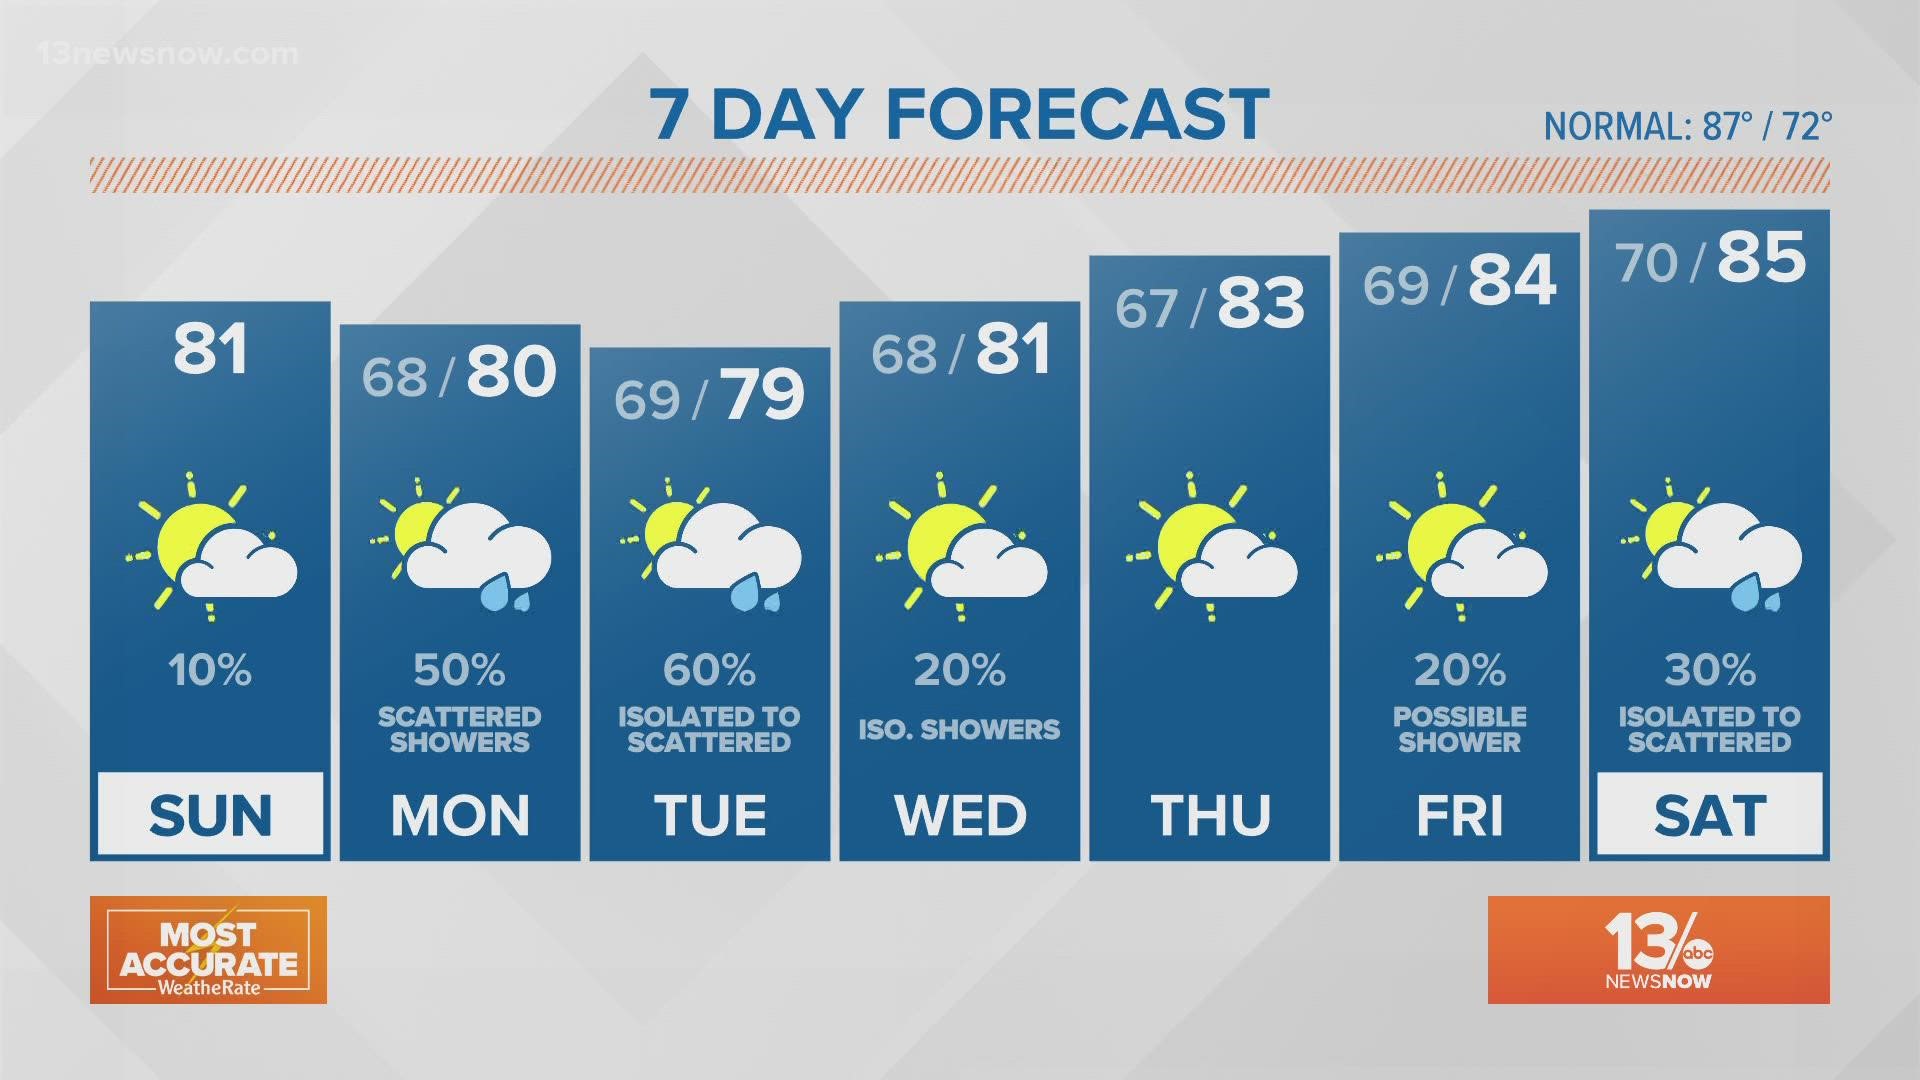 Rain chances will increase Monday, but we're looking at highs in the low to mid 80s throughout the week.